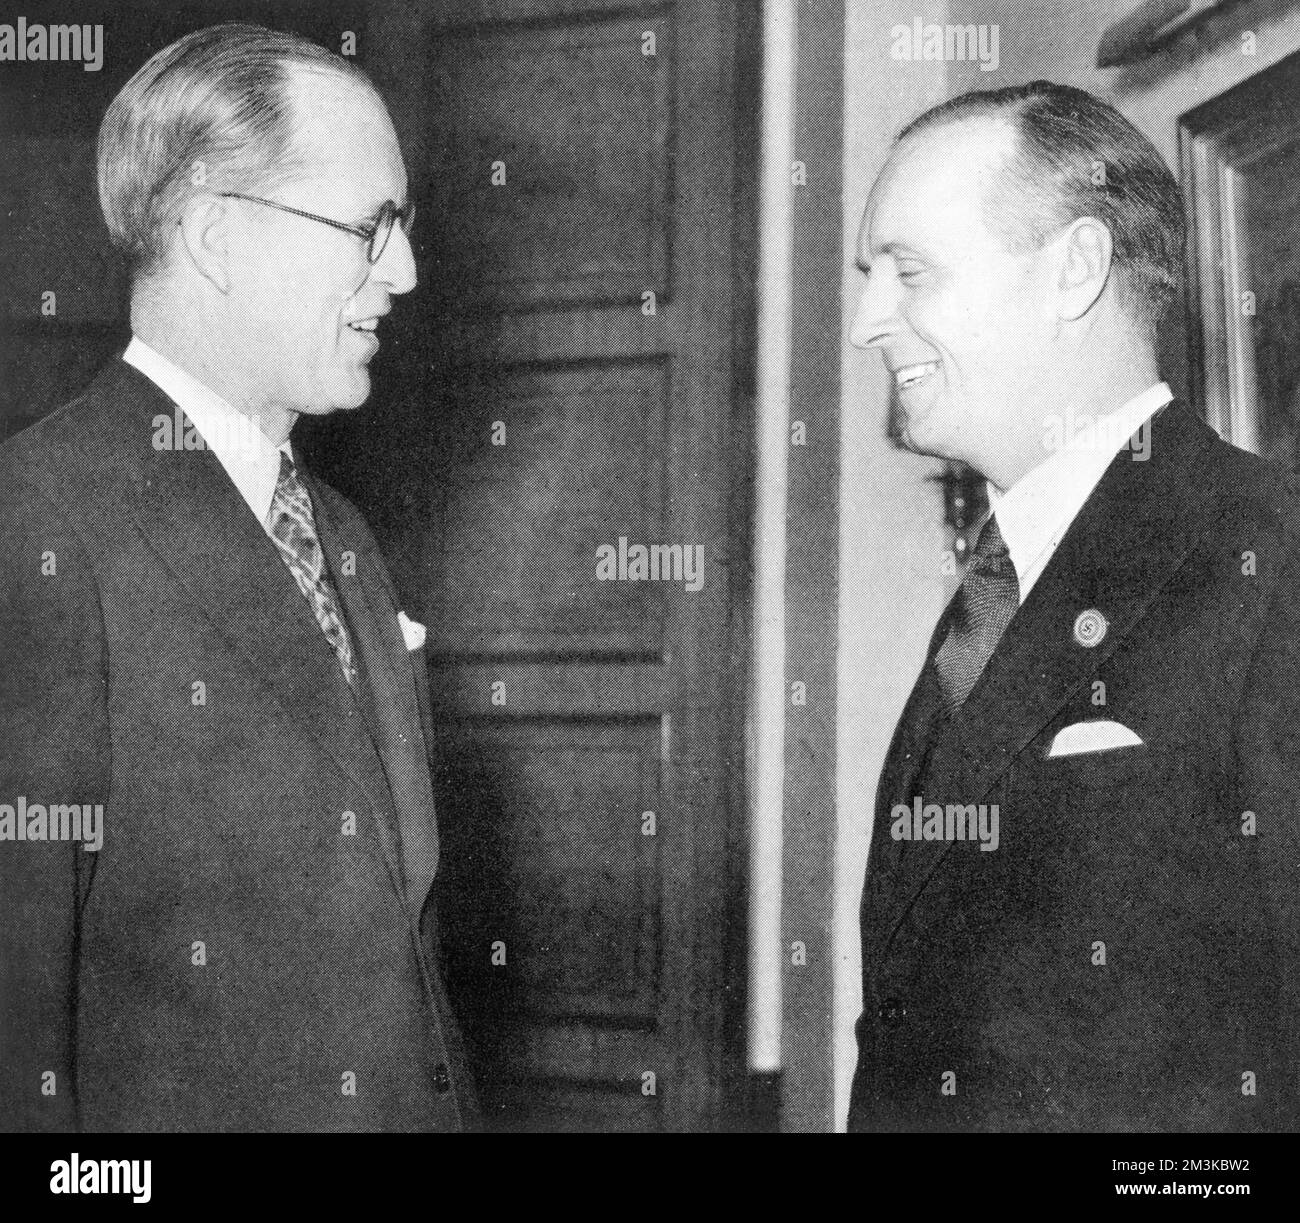 His Excellency, the American Ambassador, Mr Joseph Kennedy (father of John F, Bobby and Edward Kennedy), pictured talking to Herr Joachim von Ribbentrop, Foreign Minister of Germany and former German Ambassador in London, at a farewell reception at the German Embassy in March 1938.       Date: 1938 Stock Photo